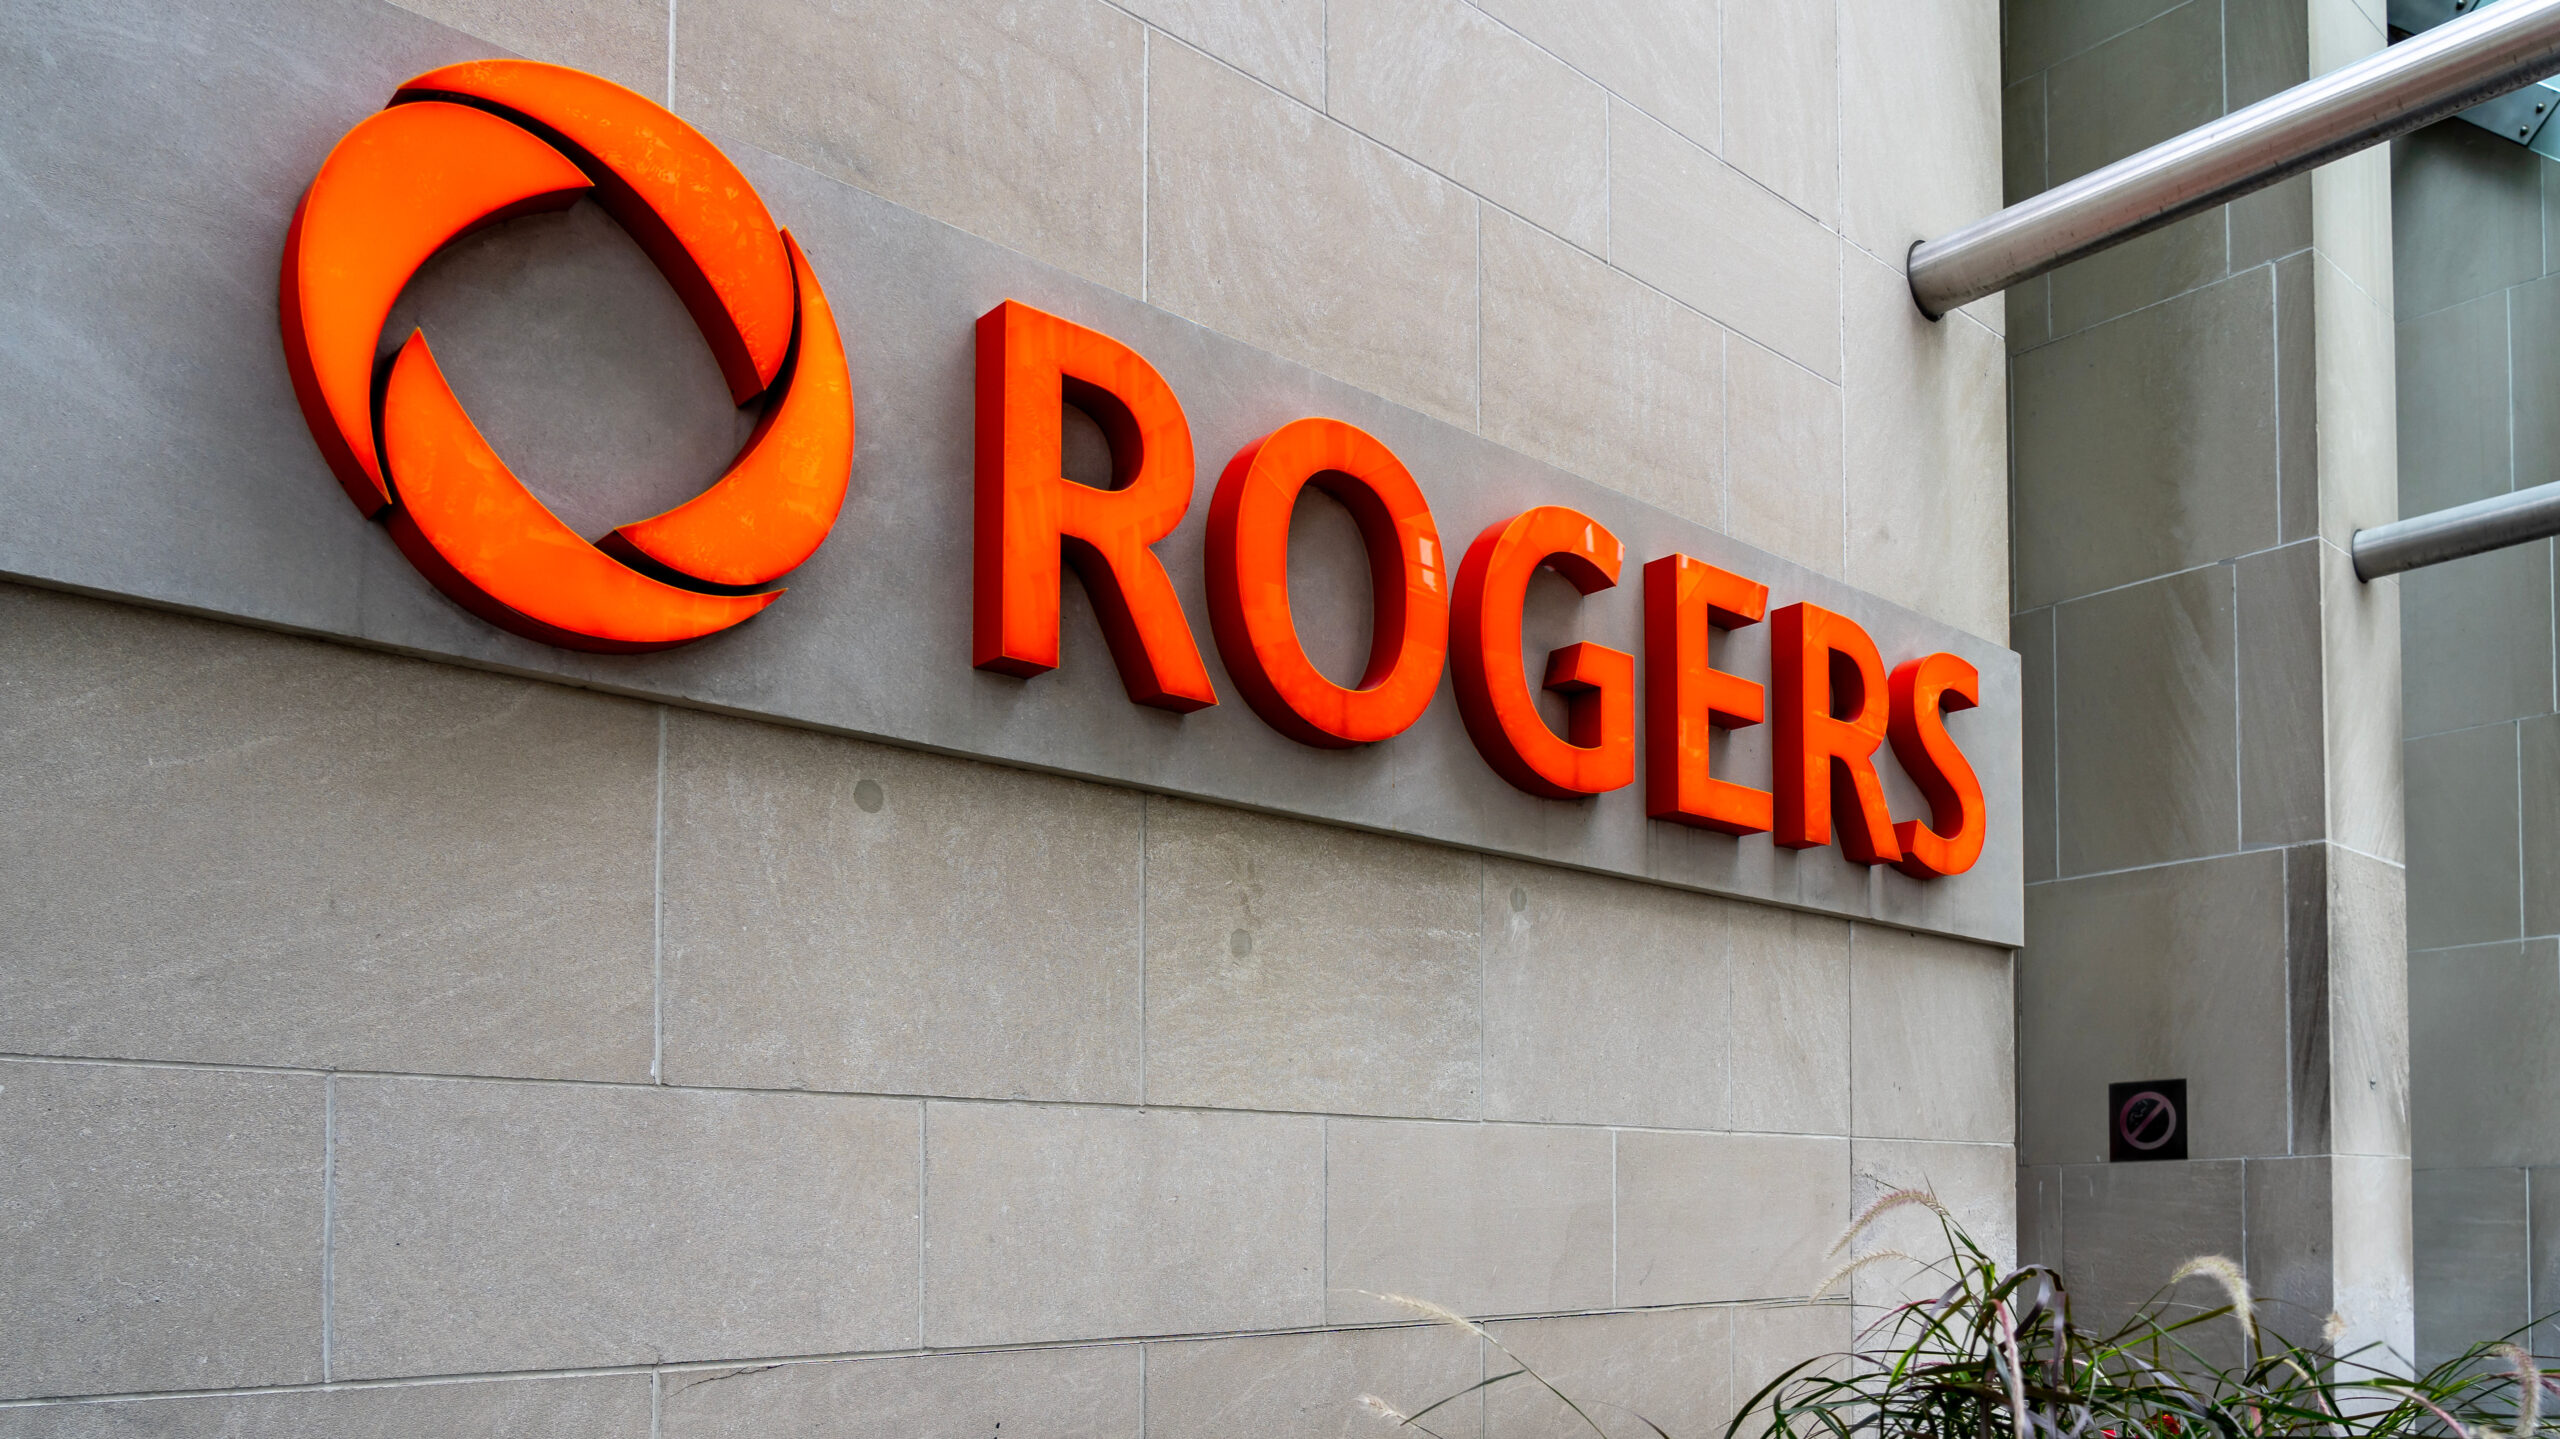 PIAC calls for the CRTC to release more details on Rogers’ response to July outage